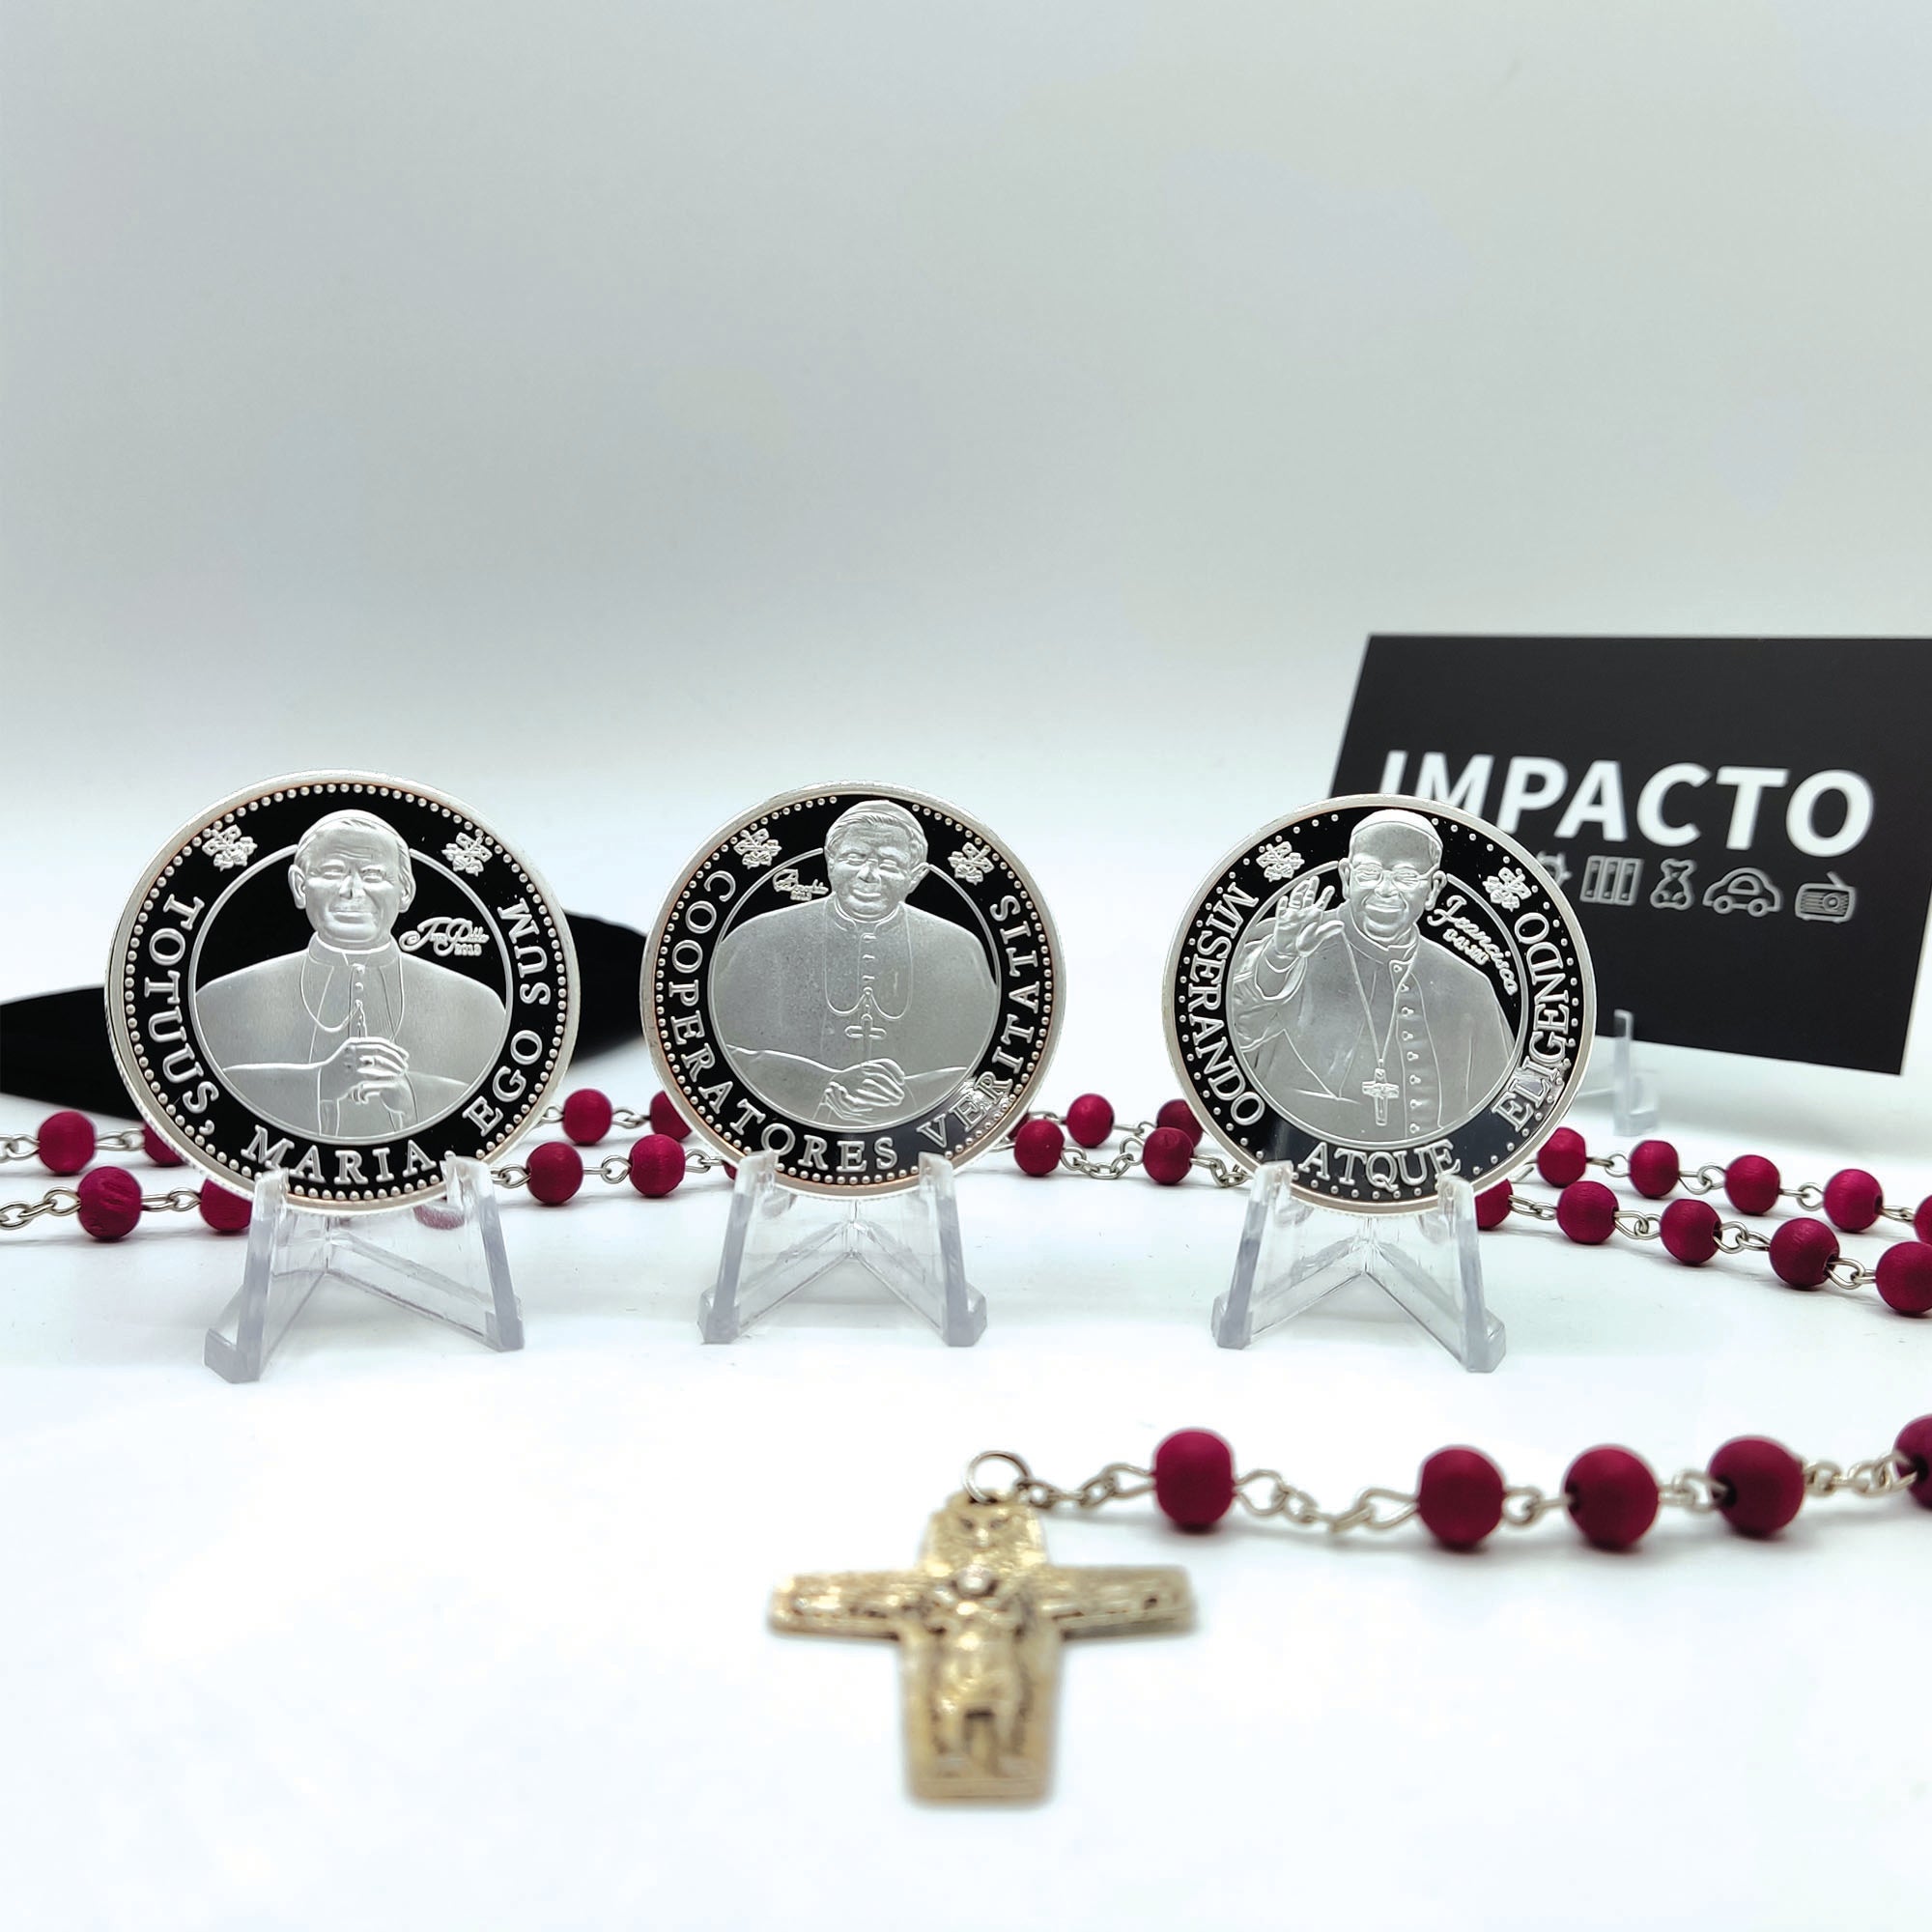 3 silver plated commemorative medals and rose scented rosary as a gift.